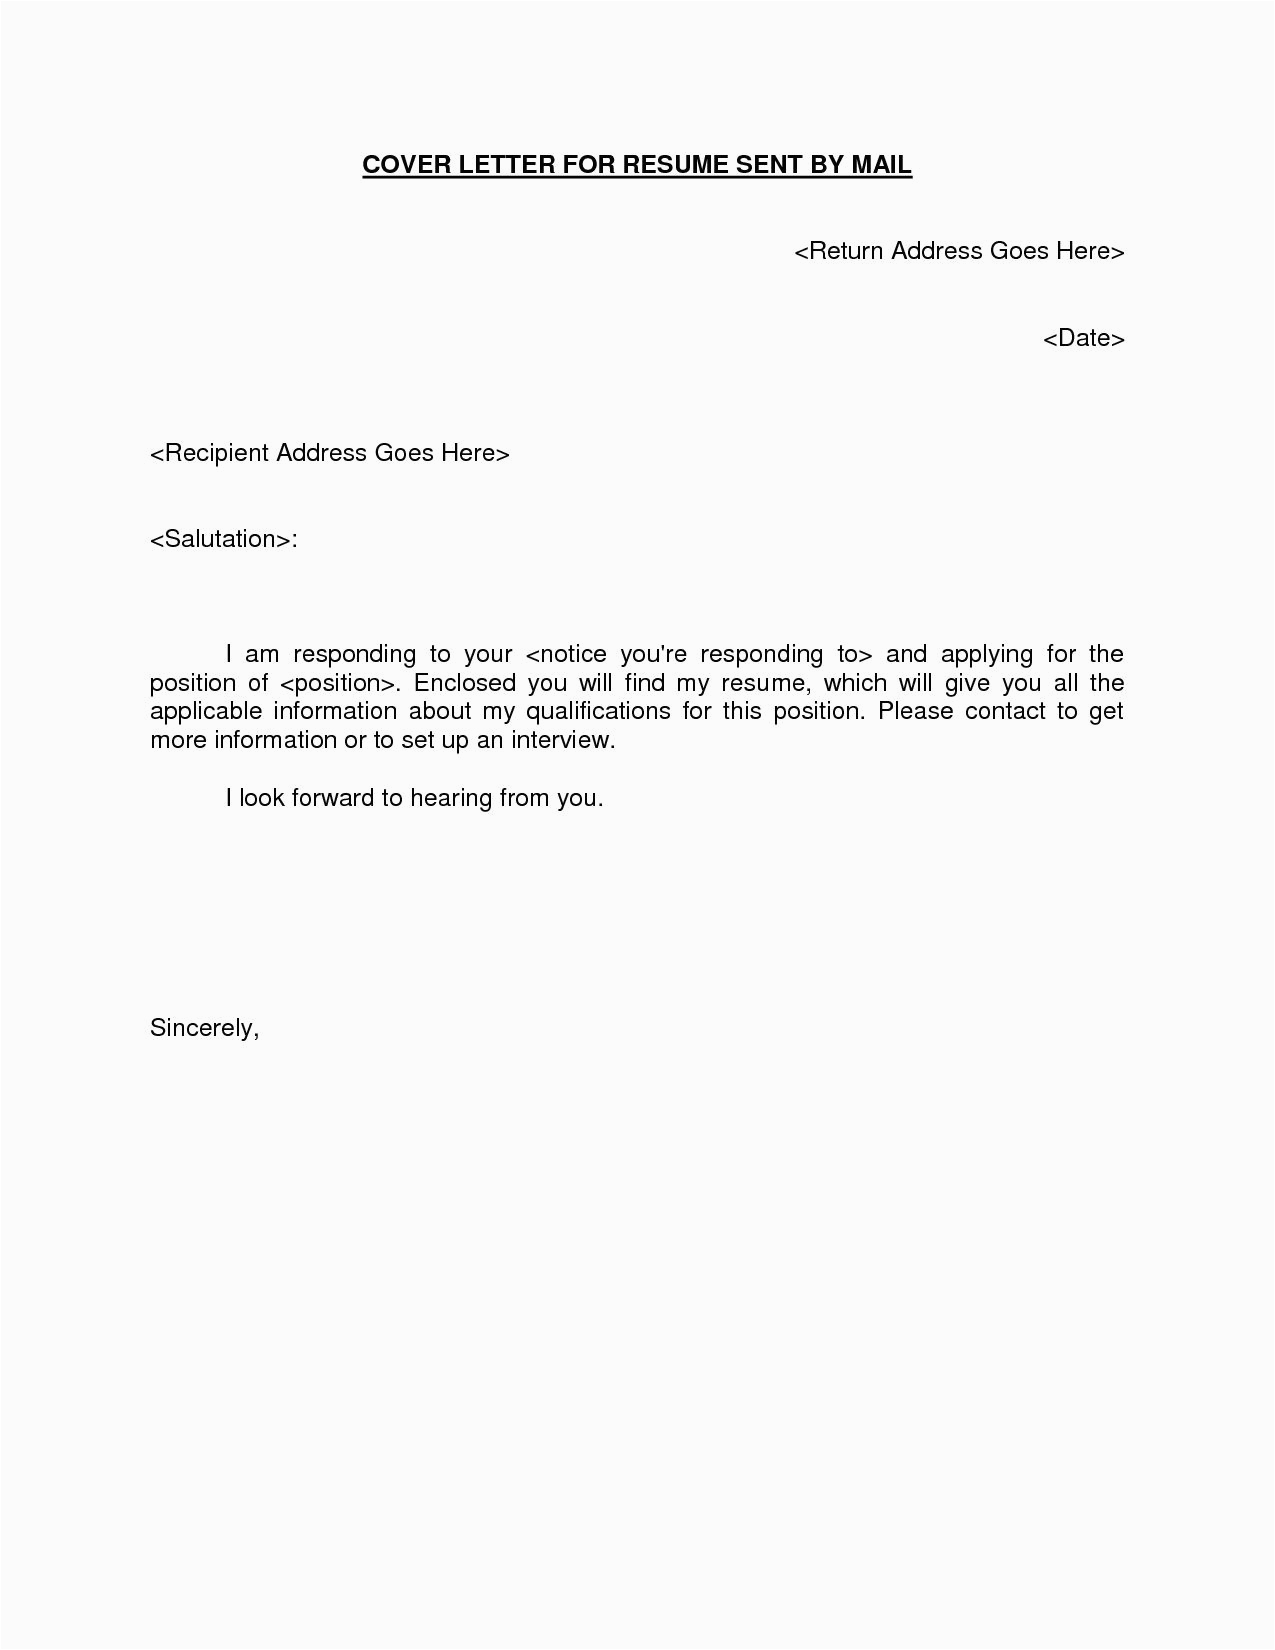 Cover Email for Resume Submission Sample 25 Email Cover Letter